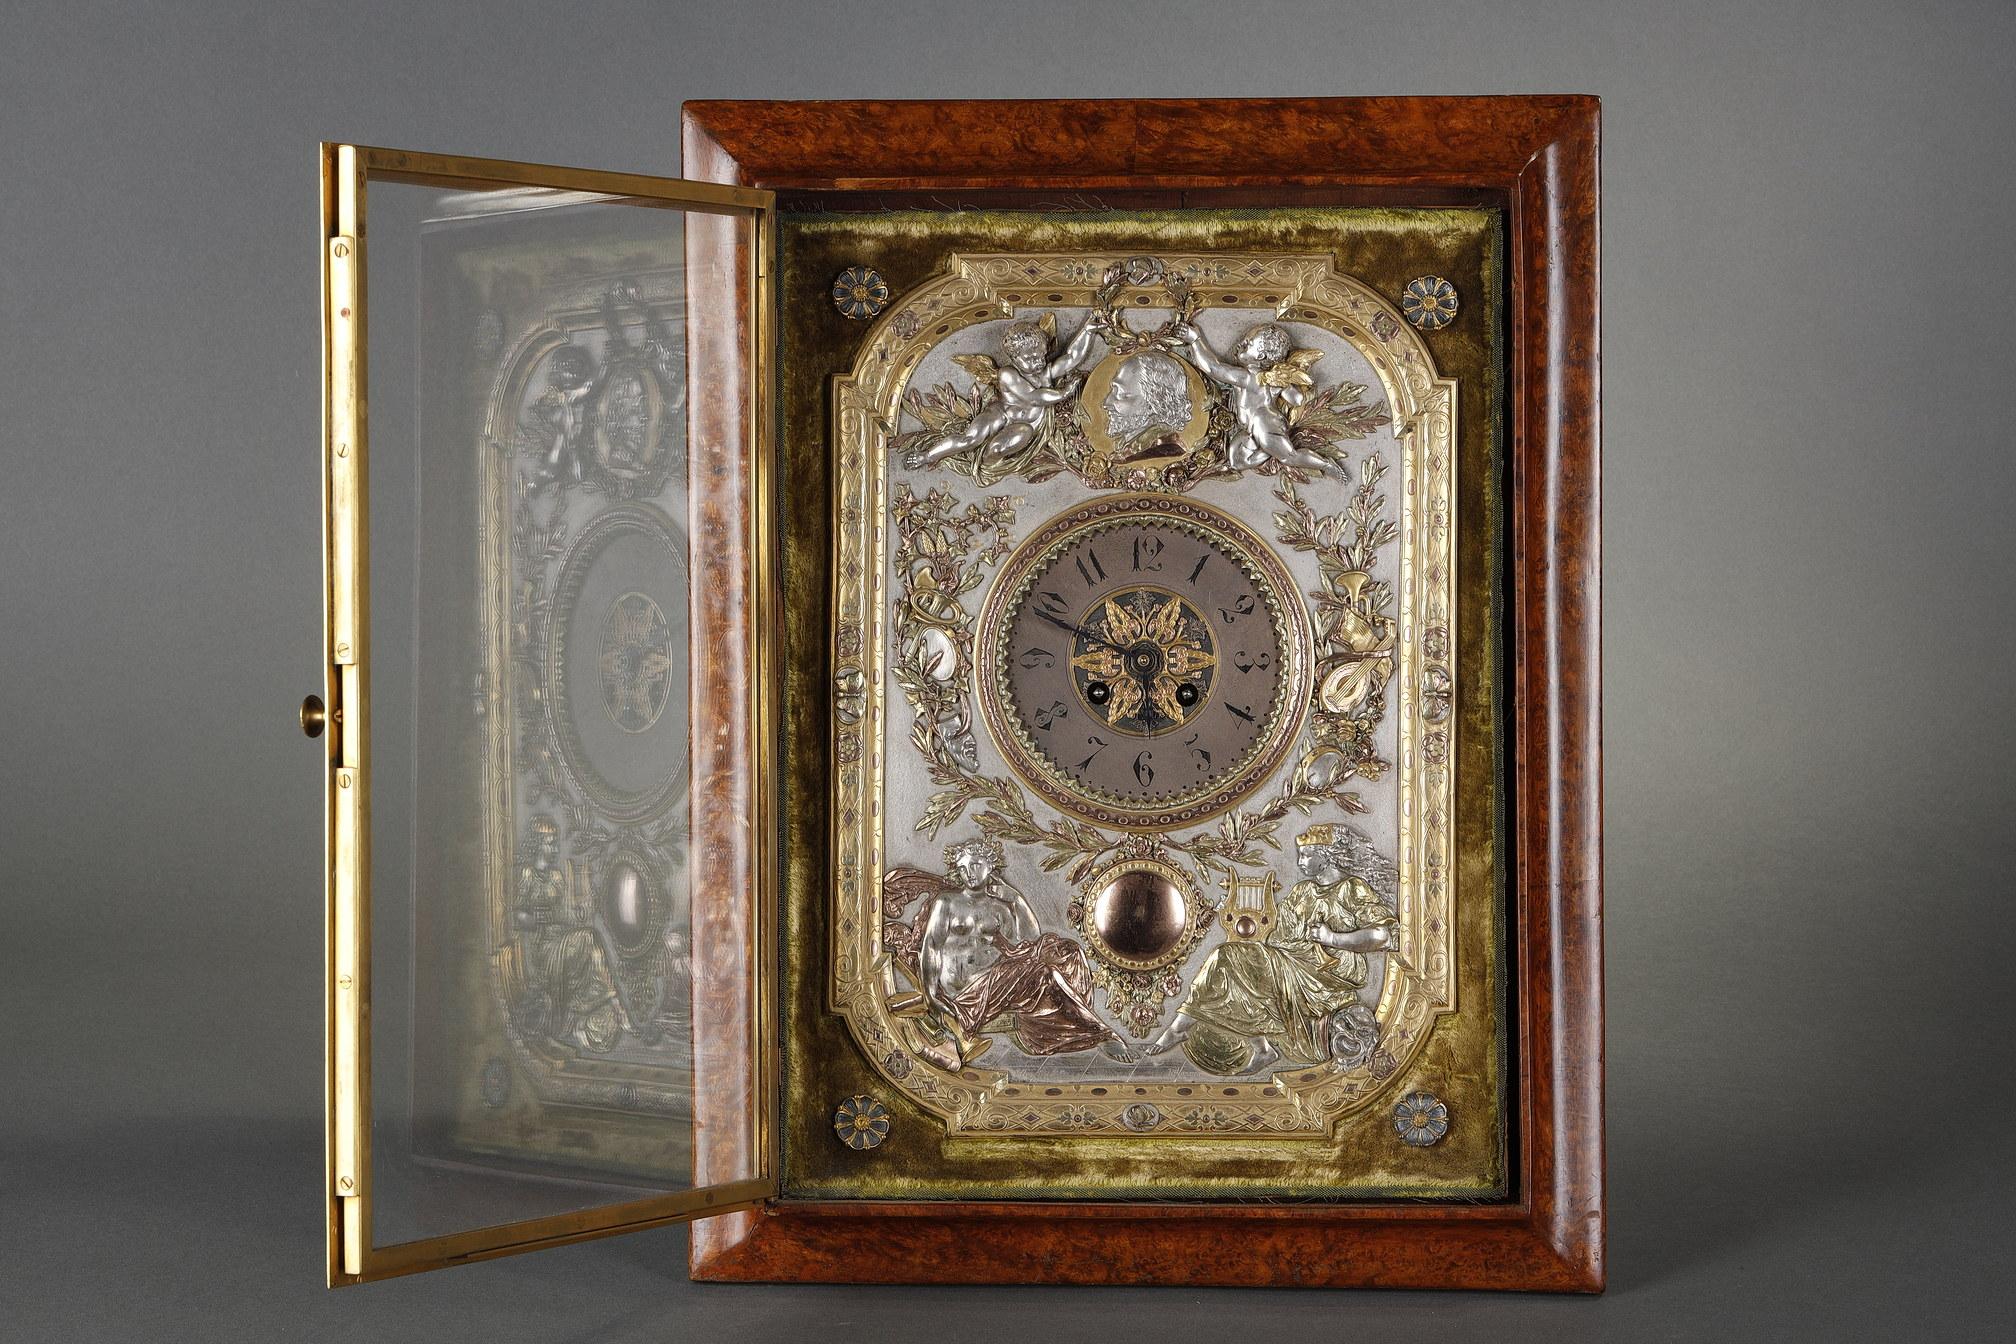 Signed Elkington & Co
Numbered Rd 92173

Beautiful rectangular table clock executed in gilded and silvered electrotyped metal, decorated in relief with butterflies, music instruments and theater masks, surmounted by two angels crowning with a